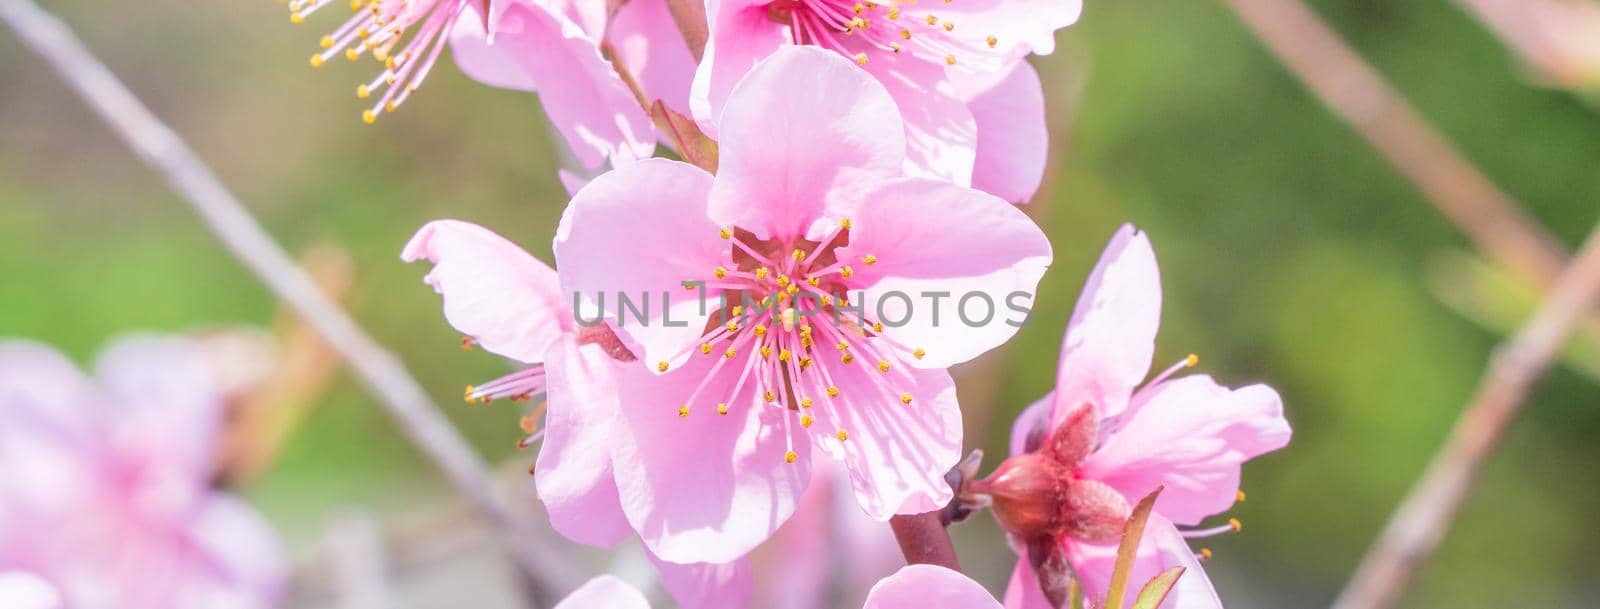 Beautiful and elegant pale light pink peach blossom flower on the tree branch at a public park garden in Spring, Japan. Blurred background. by ROMIXIMAGE